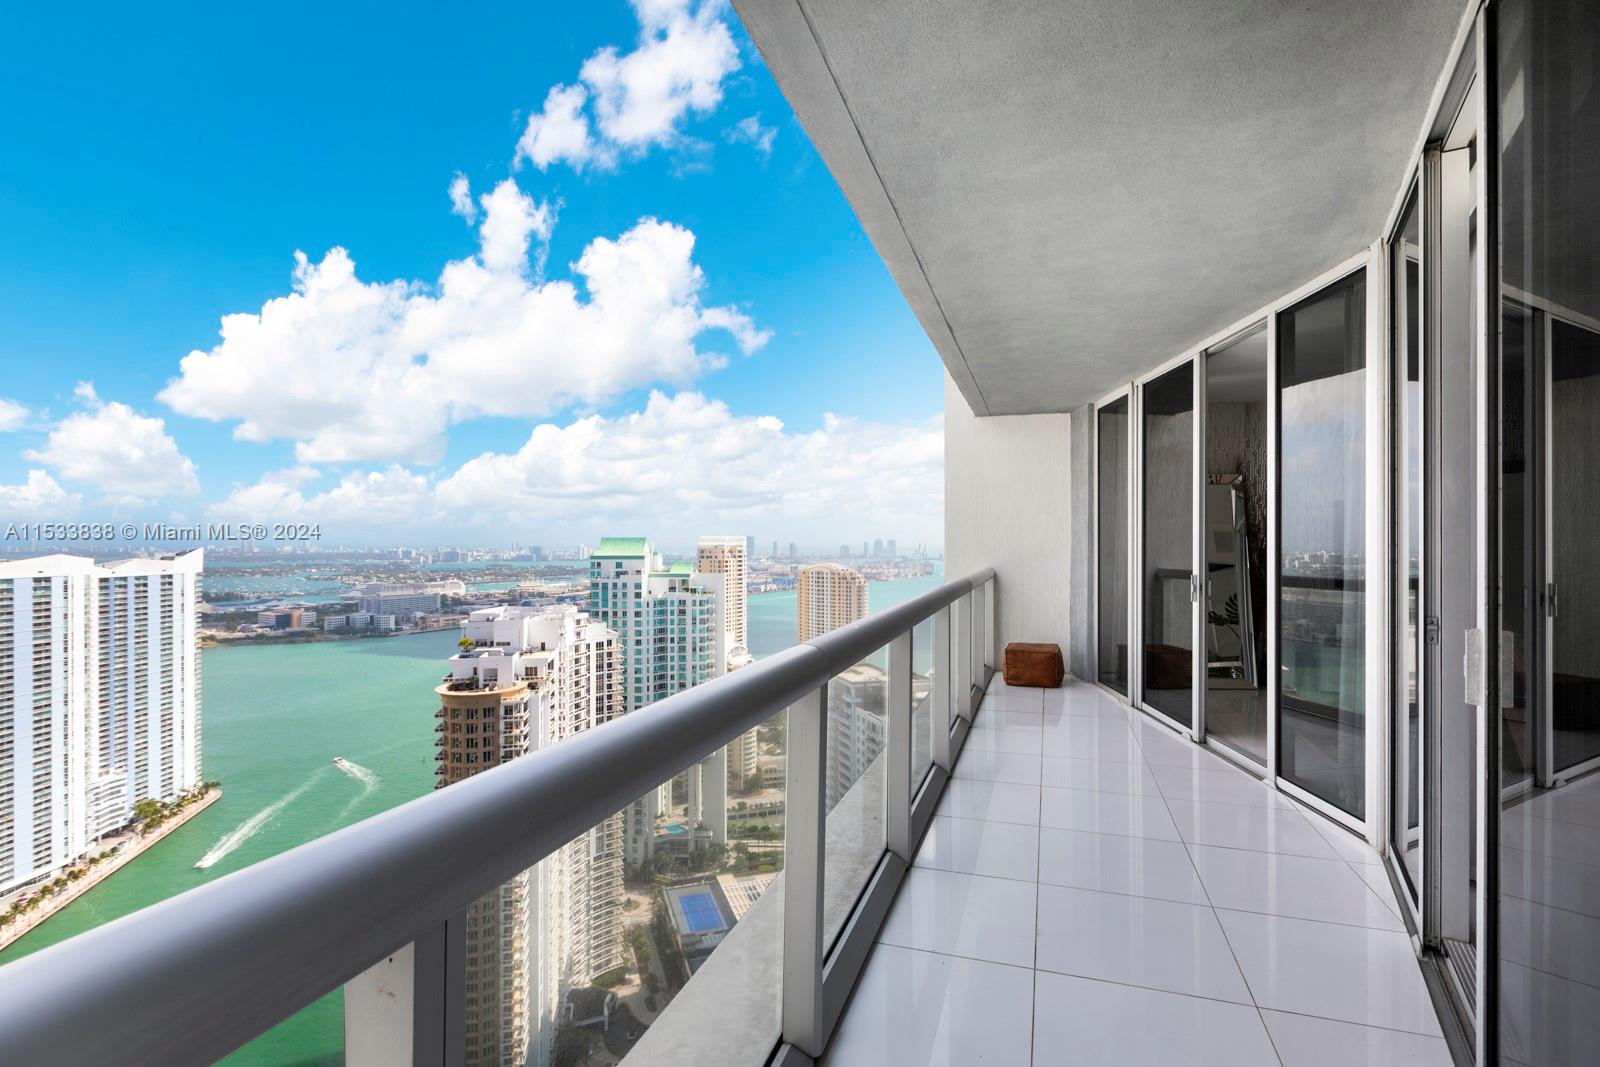 495  Brickell Ave #4706 For Sale A11533838, FL